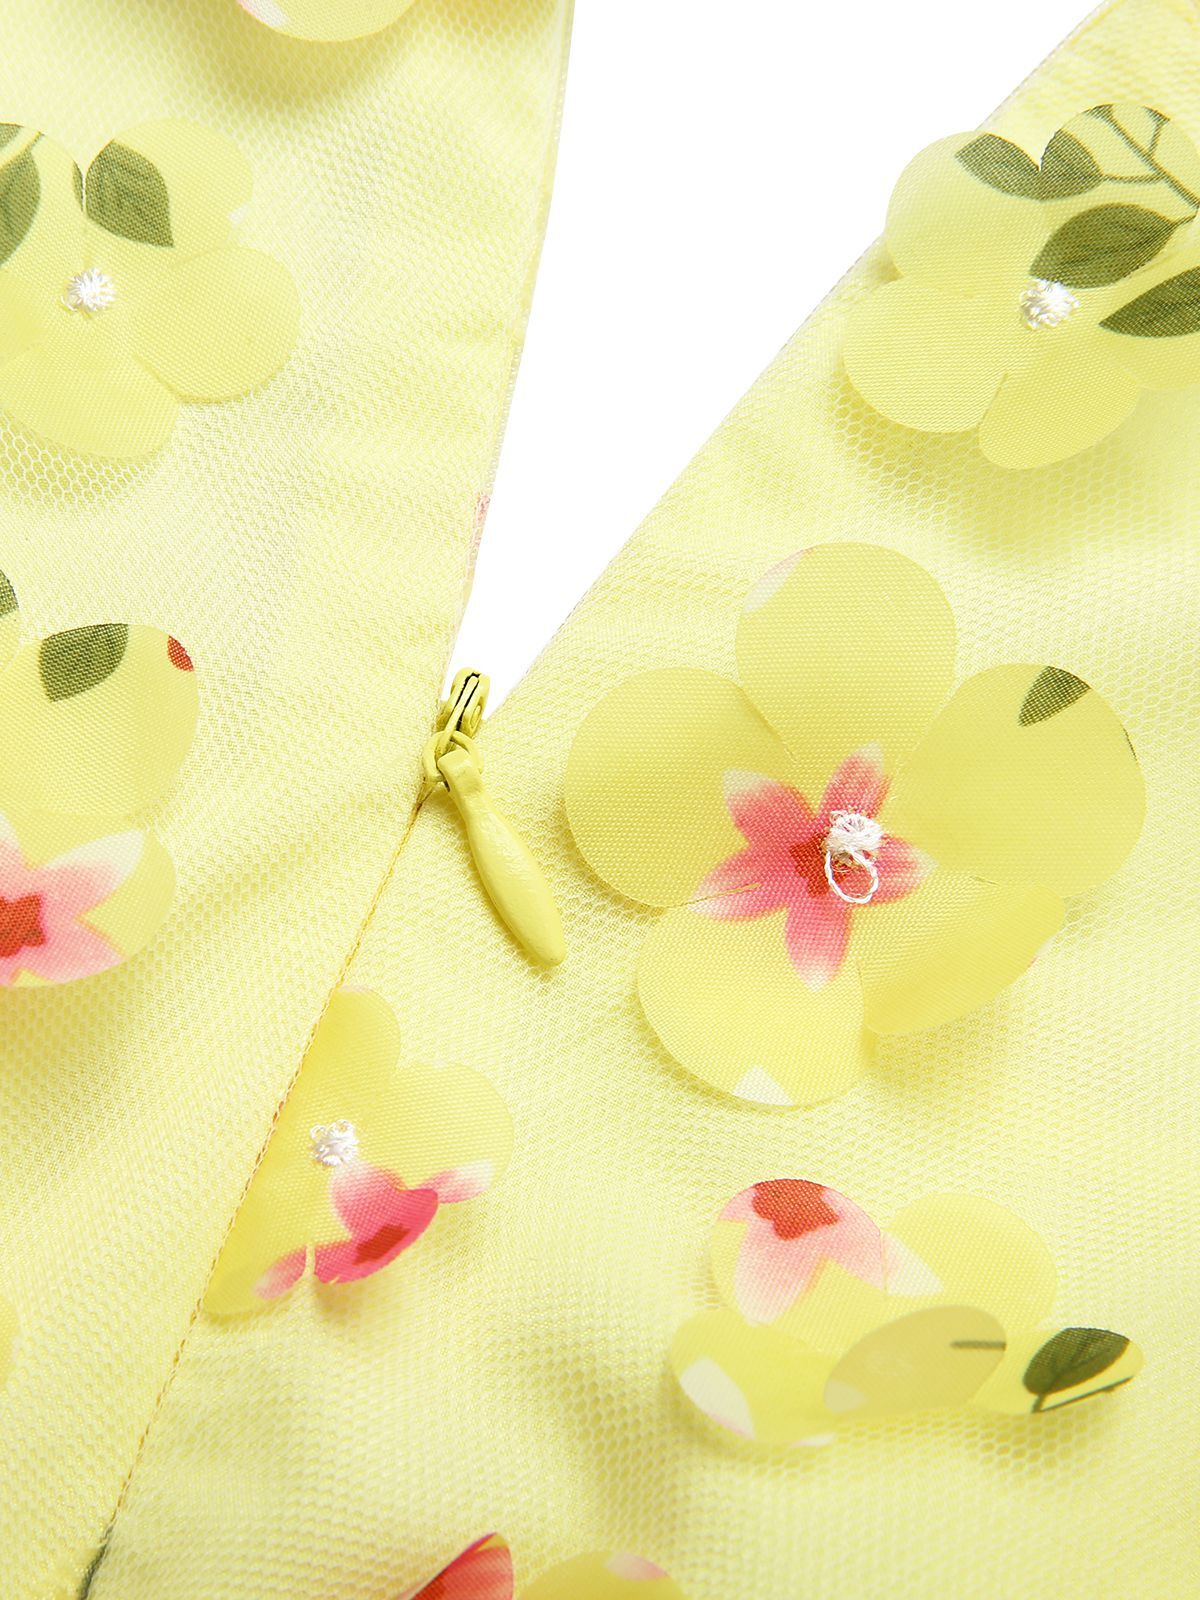 Yellow 3D Floral Puff Sleeves Swing Dress